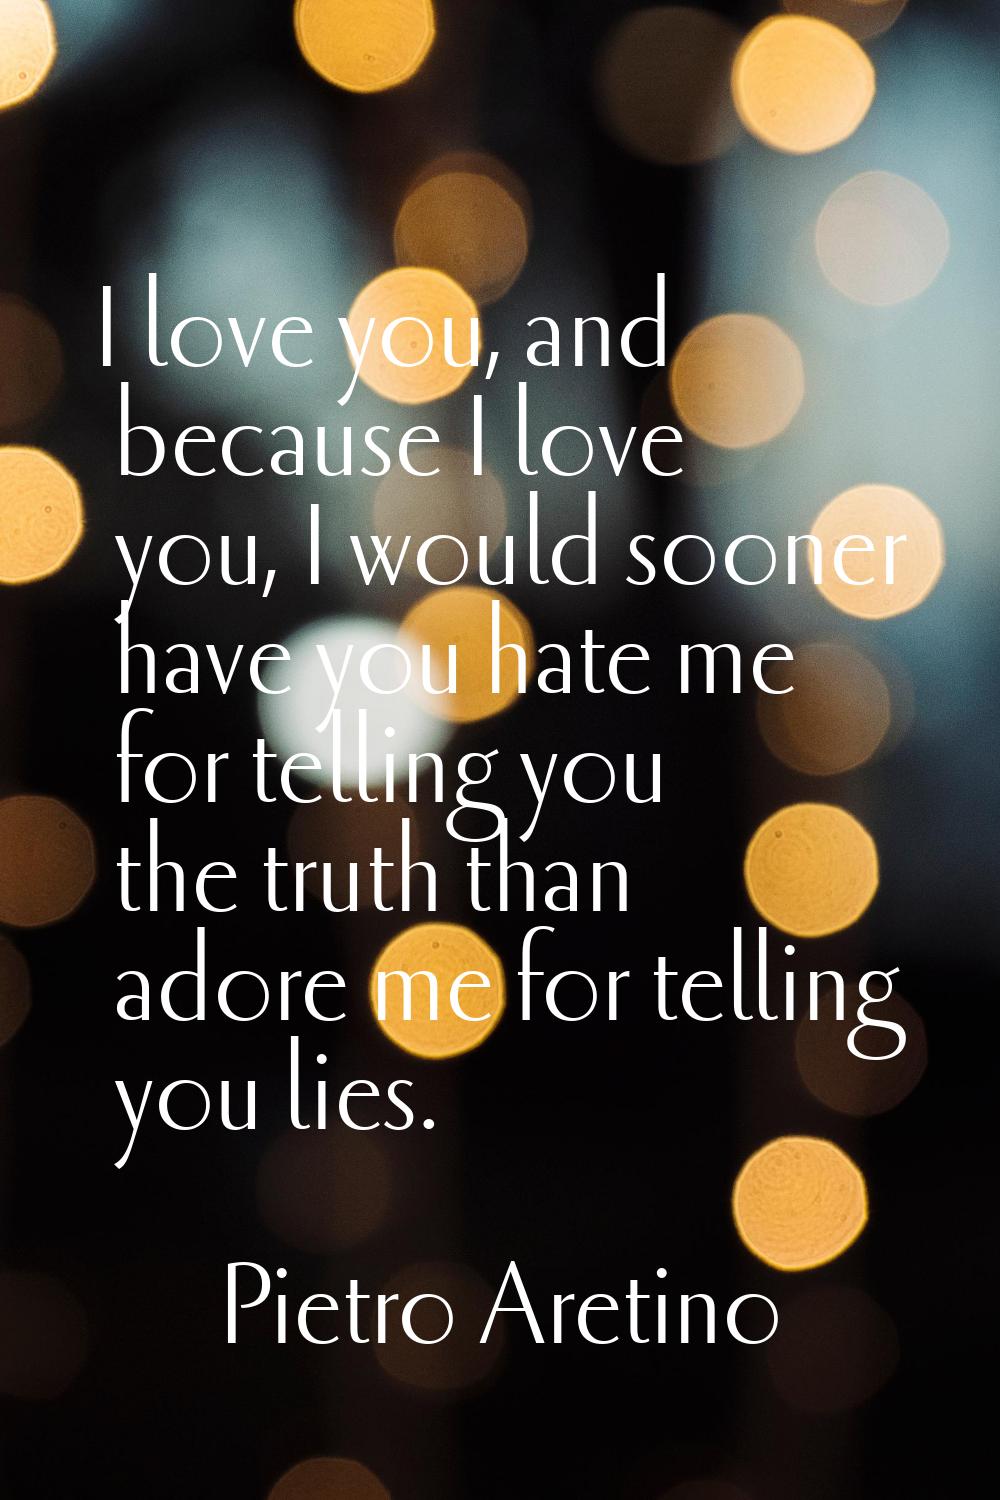 I love you, and because I love you, I would sooner have you hate me for telling you the truth than 